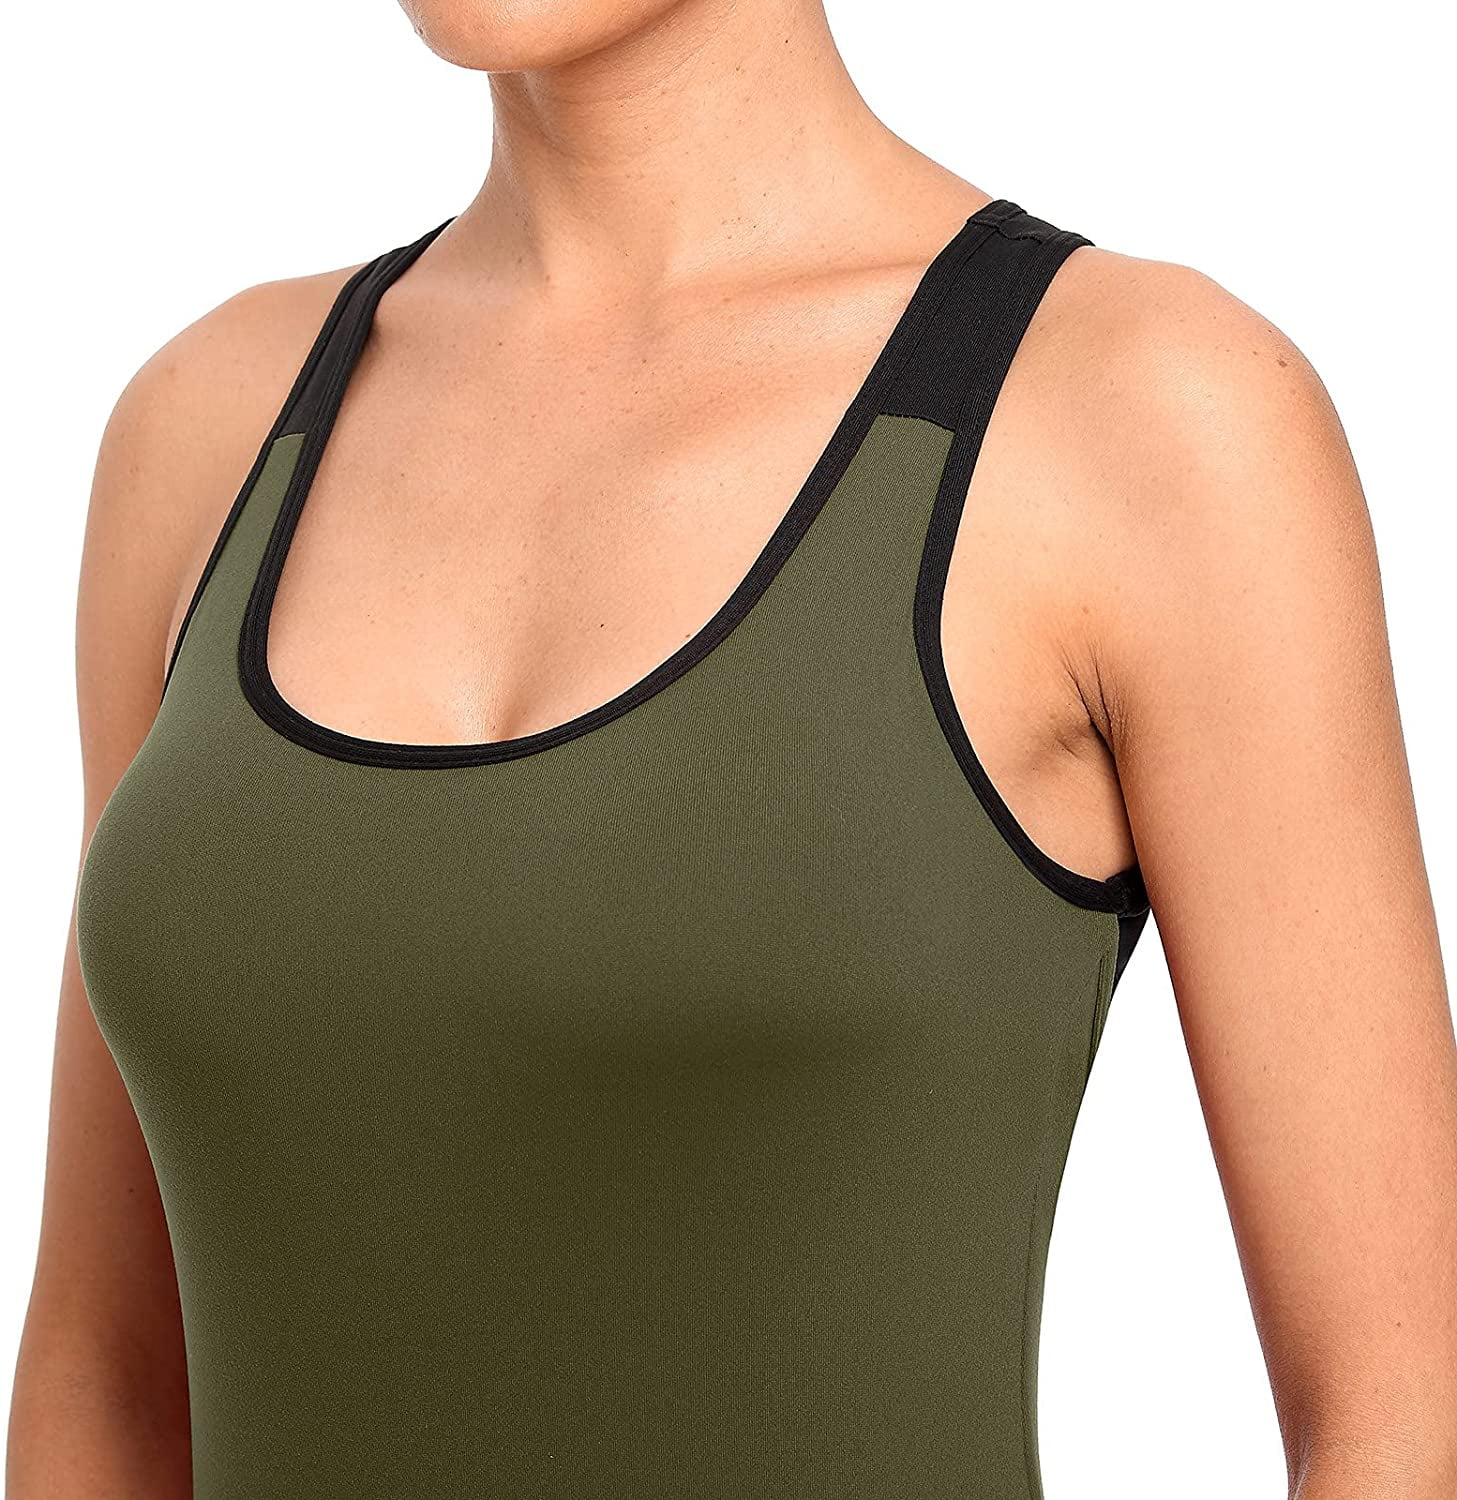 Women's Open Back Workout Tank Top with Built in Bra Athletic Yoga